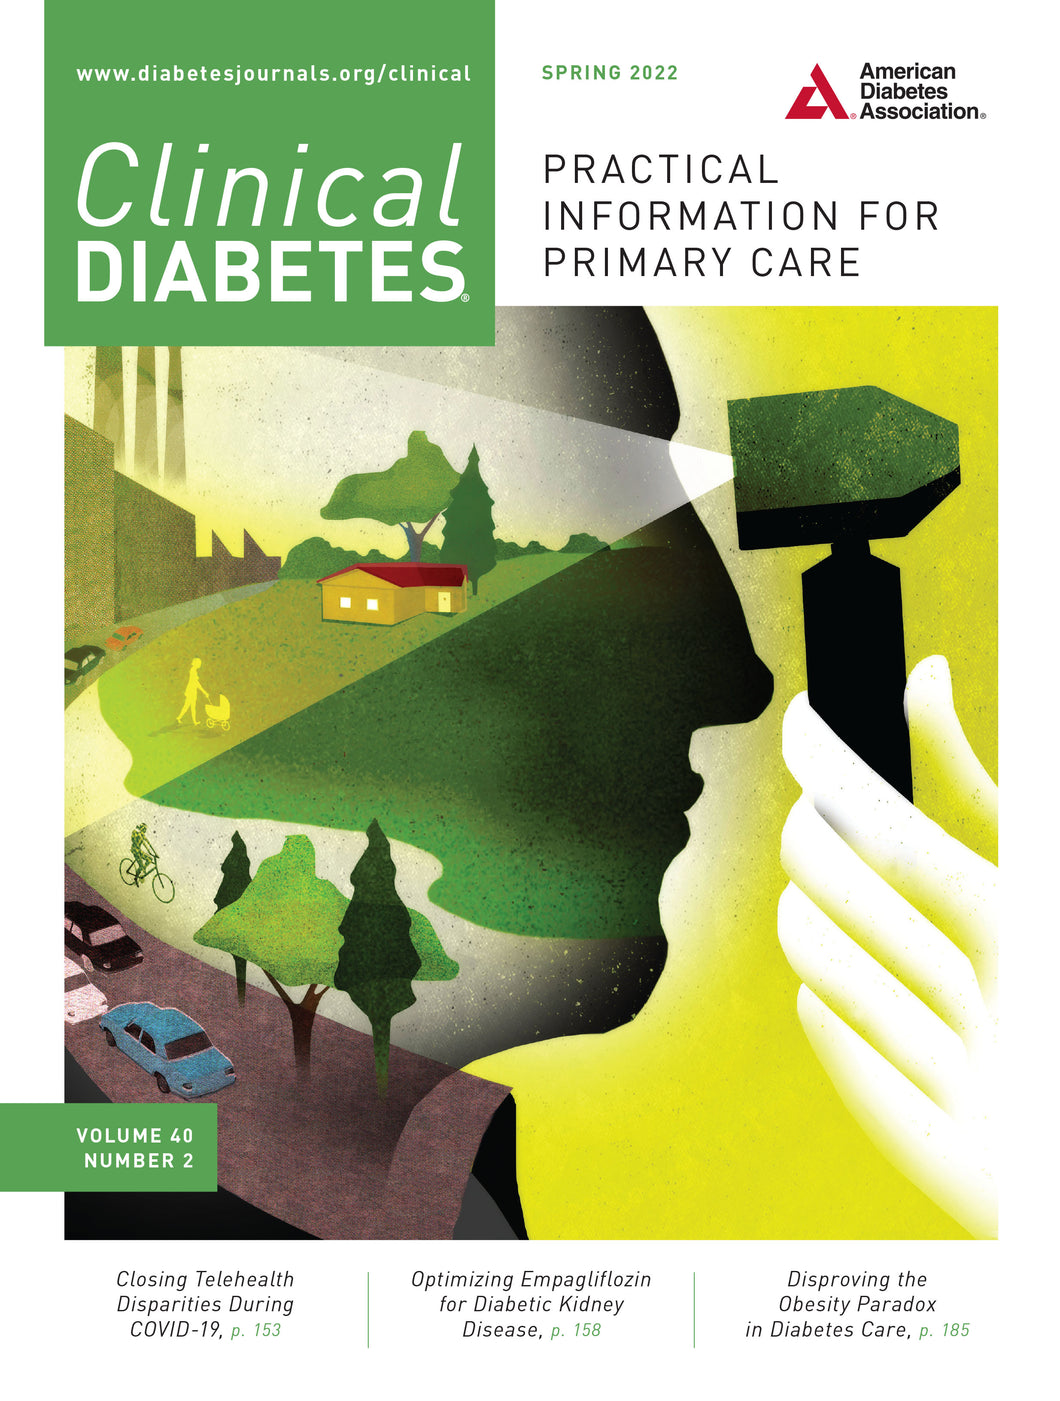 Clinical Diabetes, Volume 40, Issue 2, Spring 2022